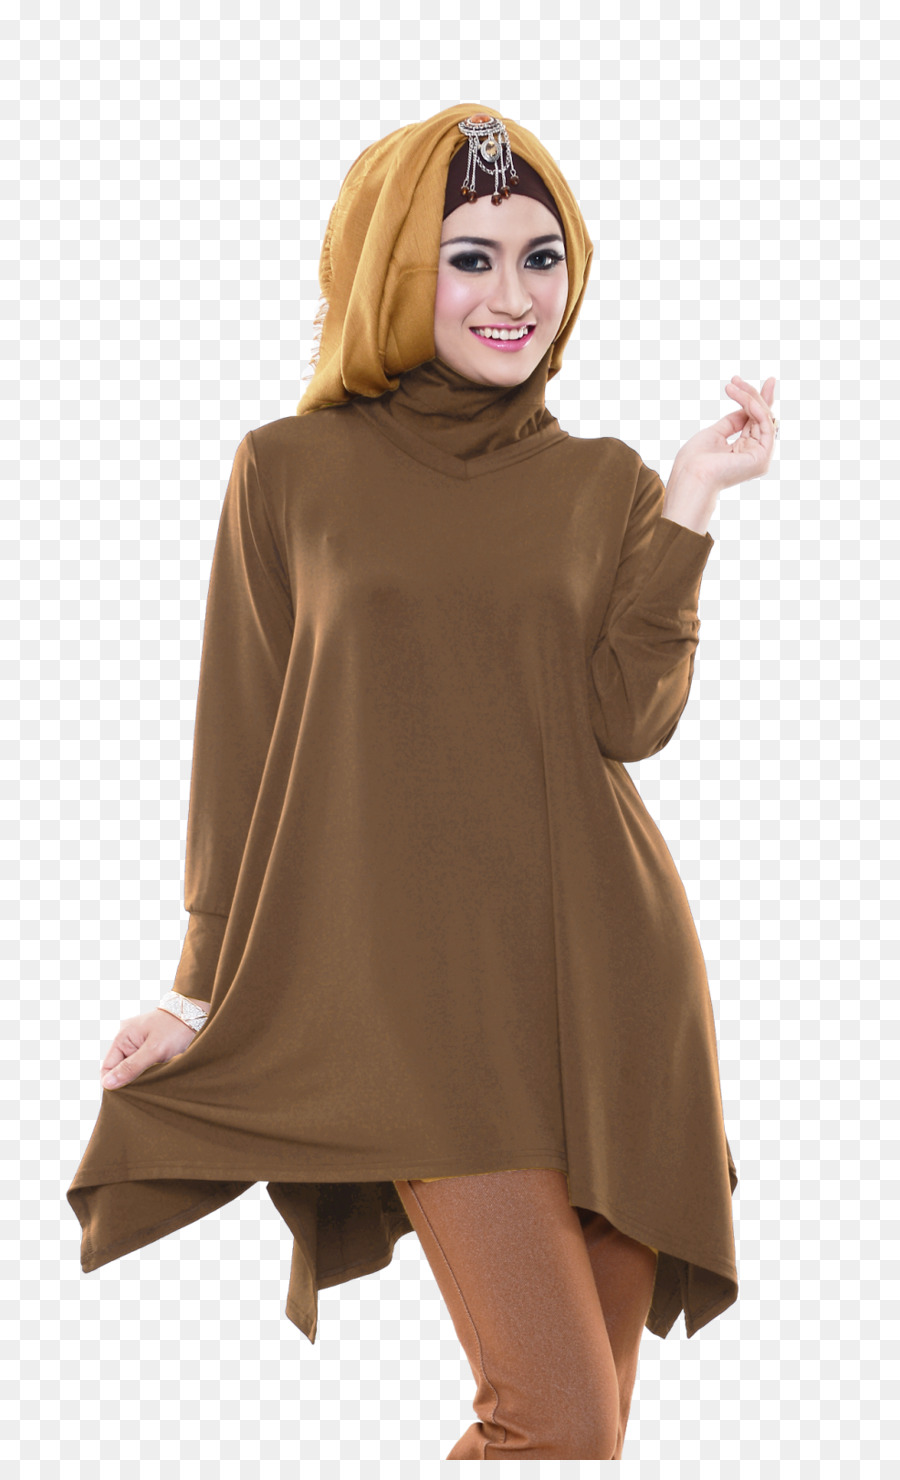 Clothing Blouse Png Download 986 1600 Free Transparent